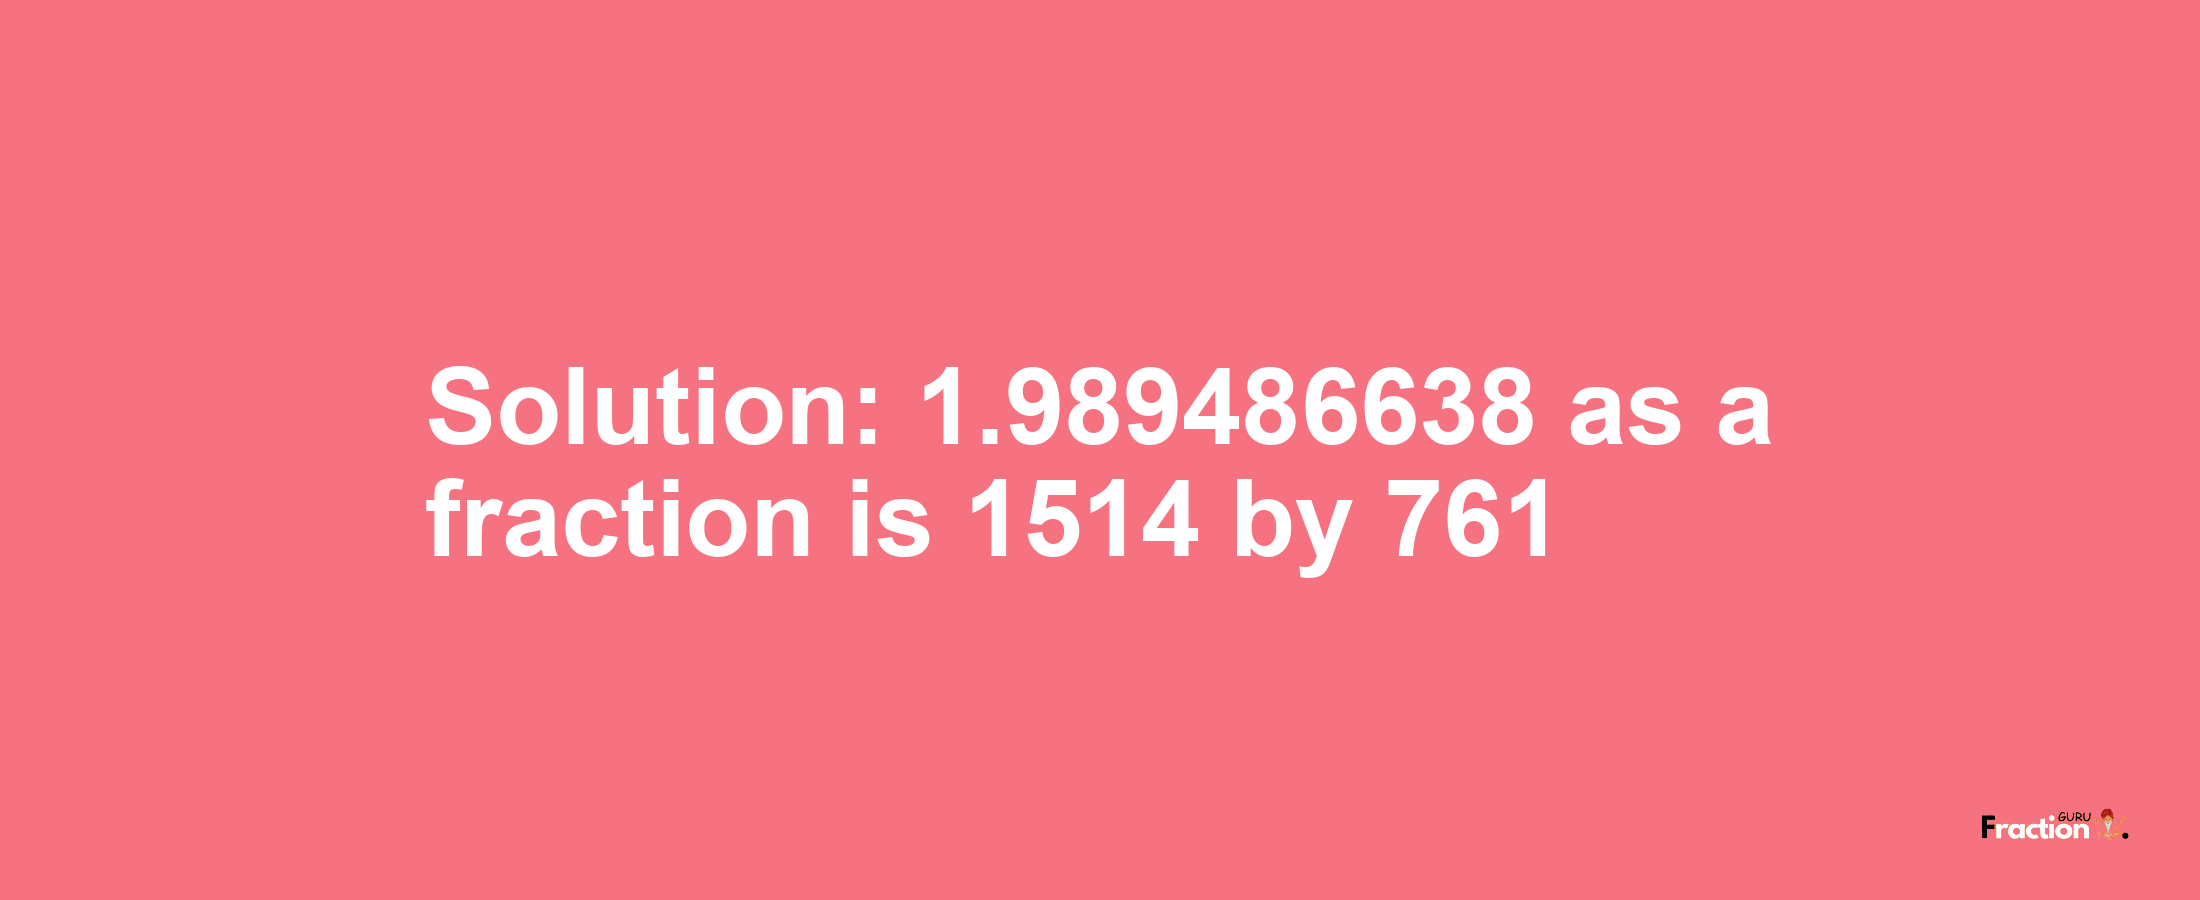 Solution:1.989486638 as a fraction is 1514/761